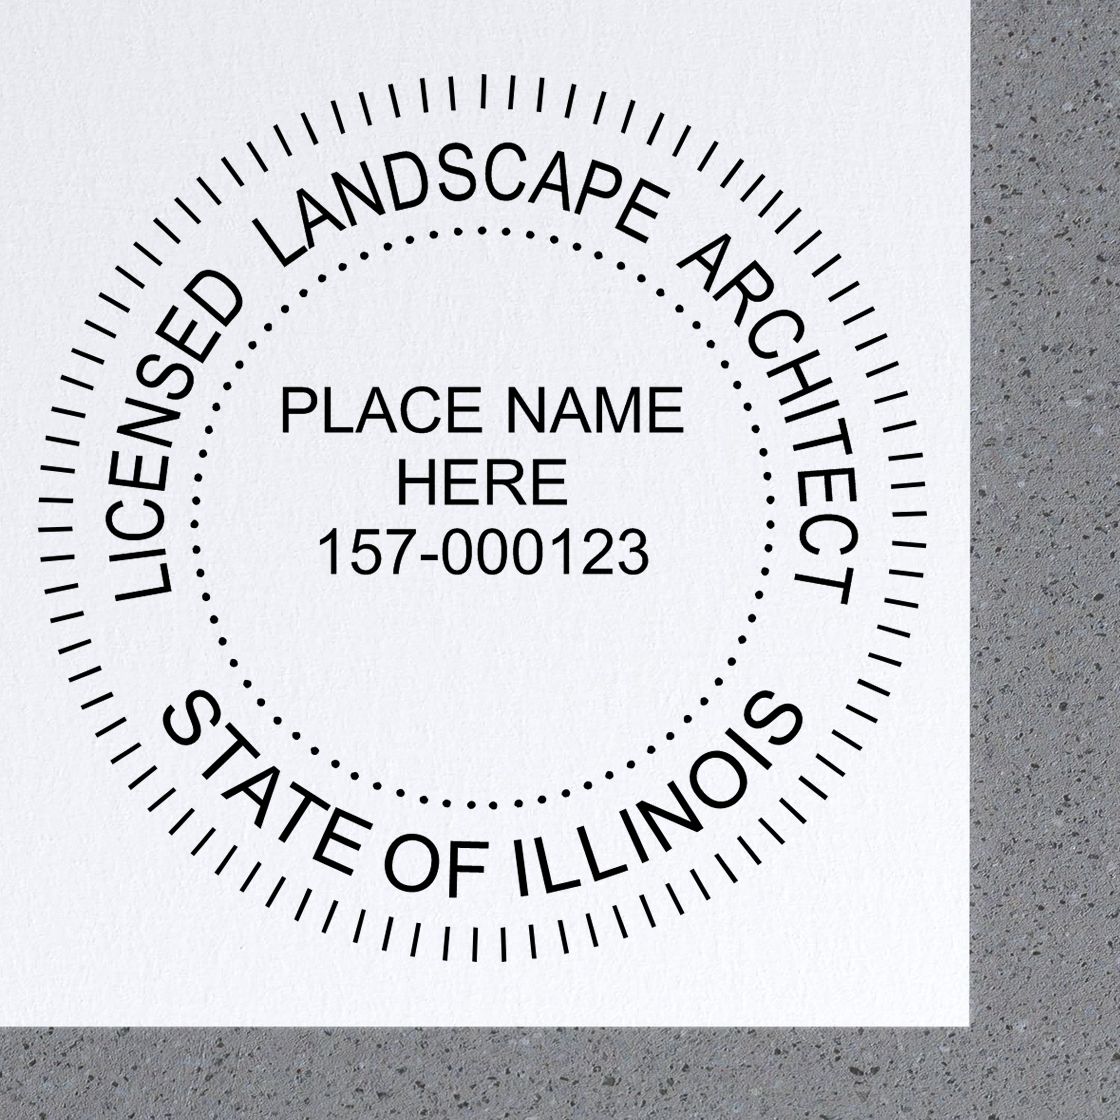 Premium MaxLight Pre-Inked Illinois Landscape Architectural Stamp in use photo showing a stamped imprint of the Premium MaxLight Pre-Inked Illinois Landscape Architectural Stamp